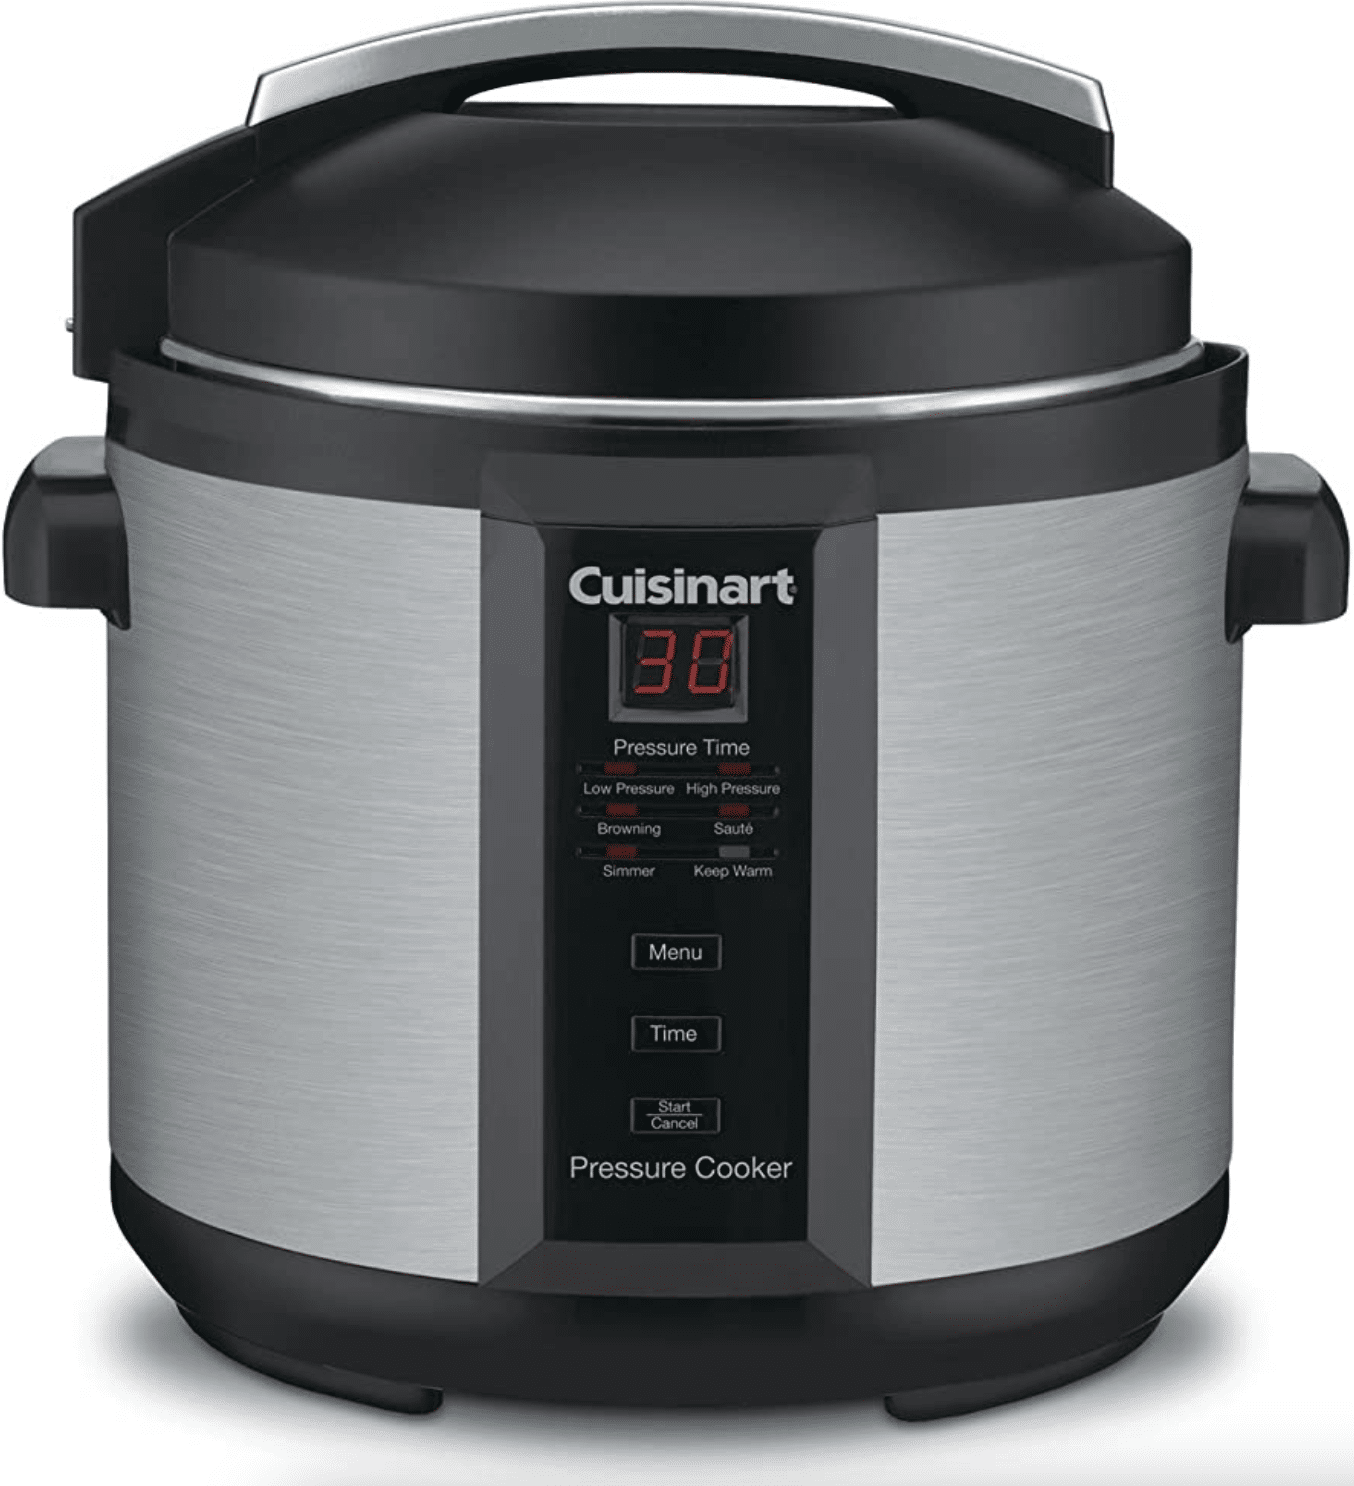 Cuisinart Pressure Cooker Lawsuit Filed by Burned Woman